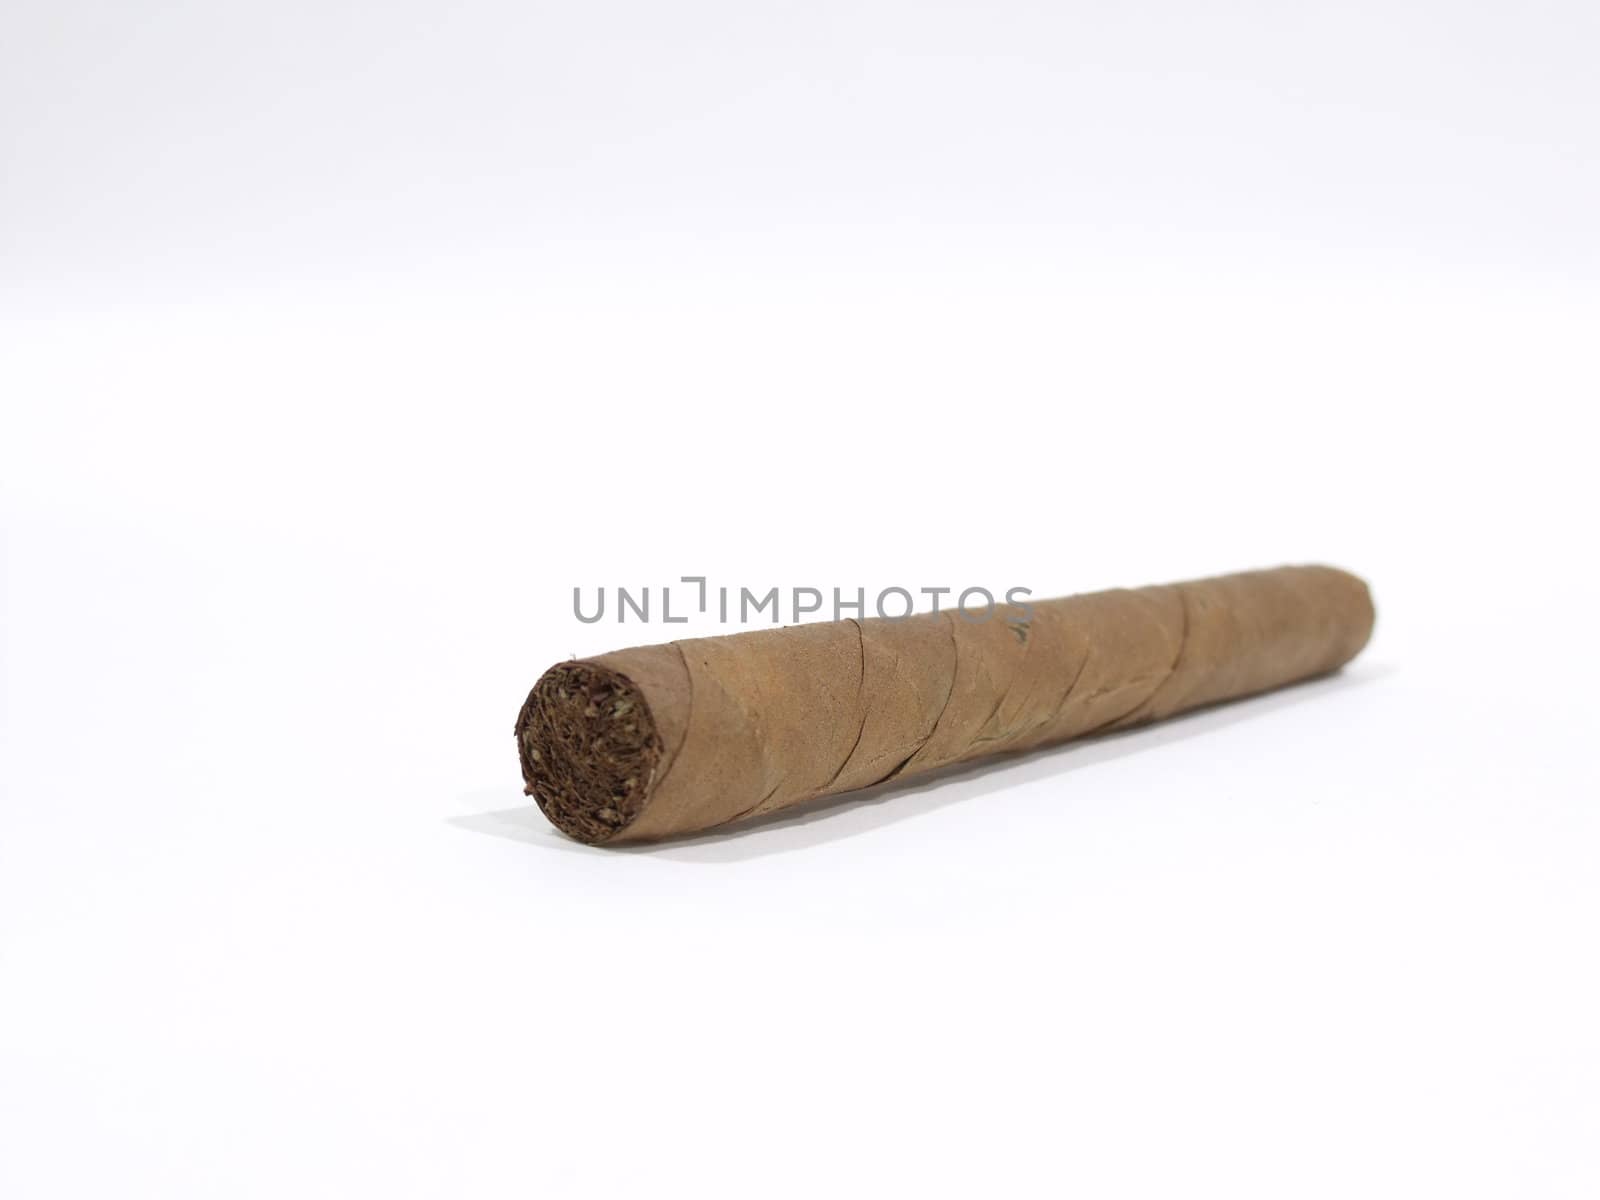 Long wrapped cigar by WarburtonPhotos